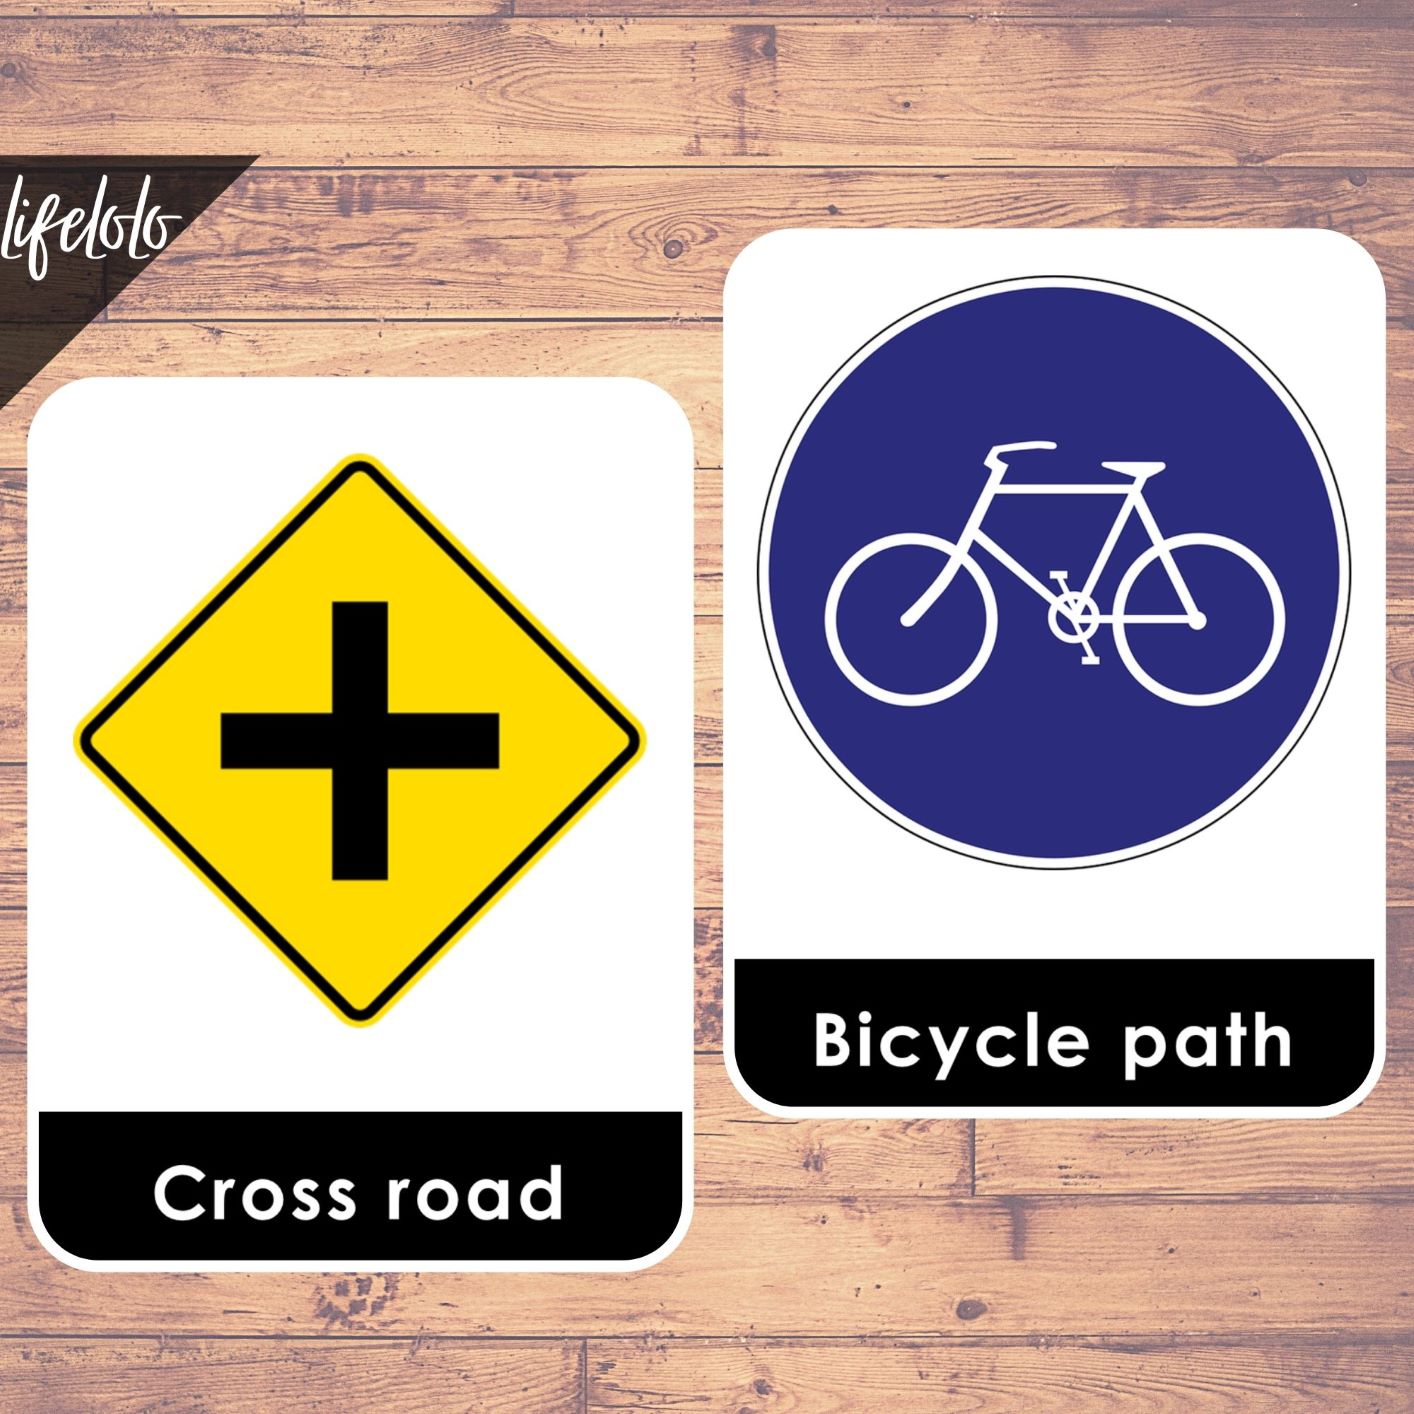 traffic-signs-51-flash-cards-street-signs-road-signs-montessori-materials-educational